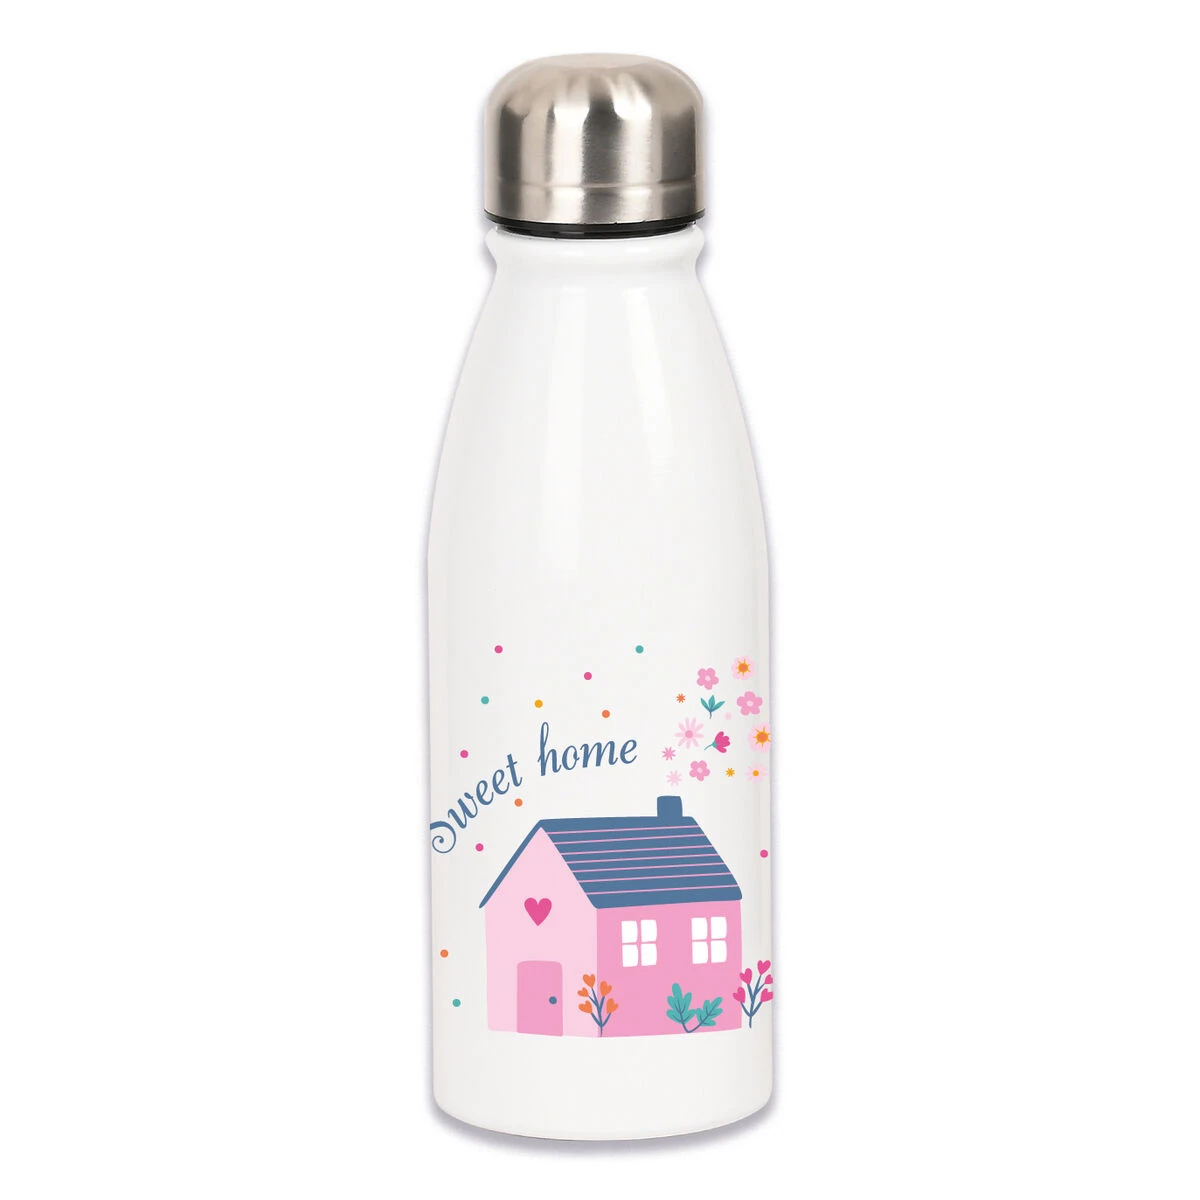 White bottle with house pattern and flowers, 'sweet home' text